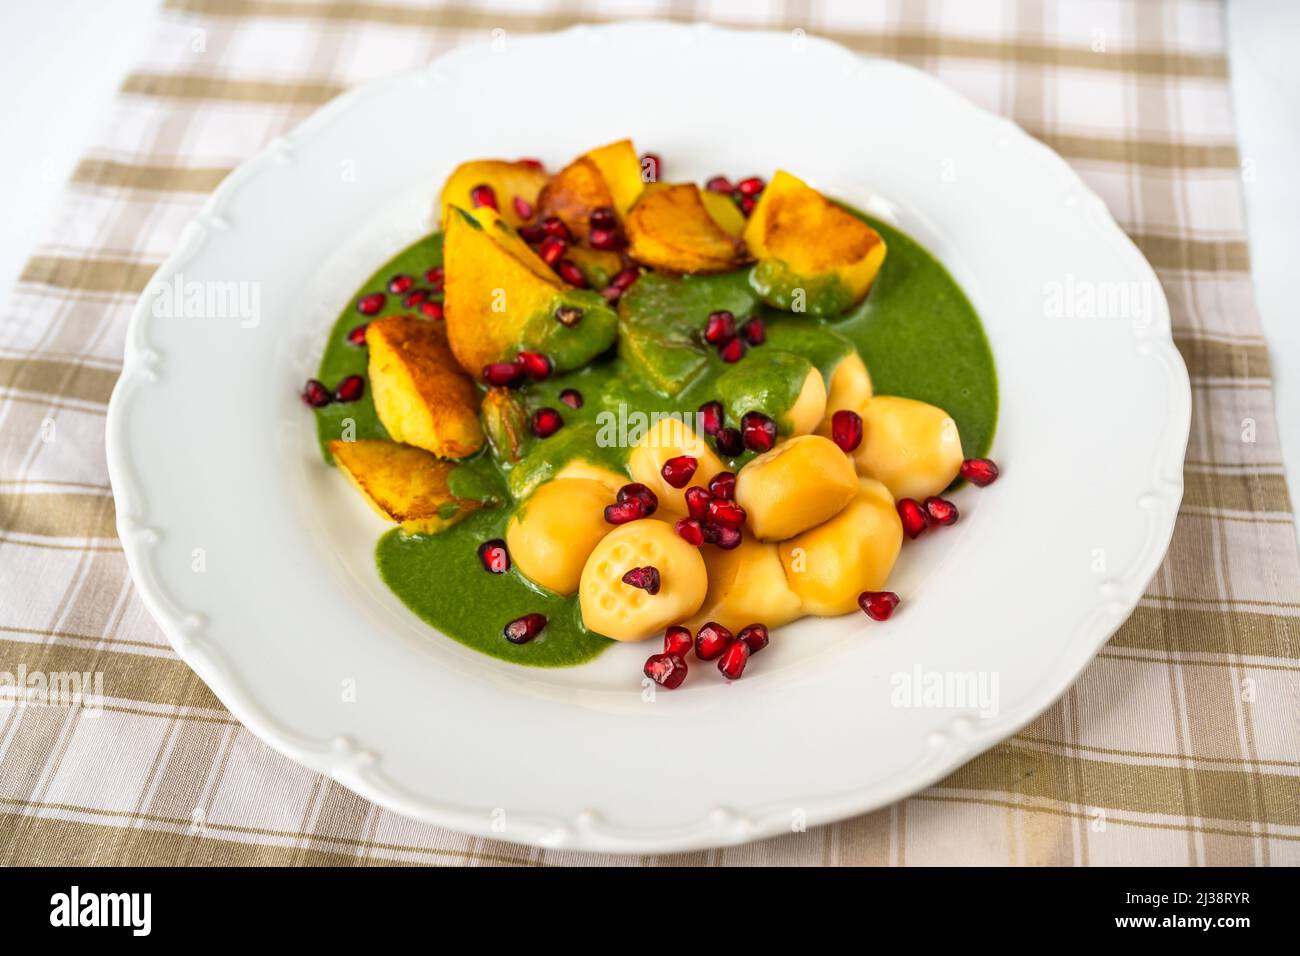 Smoked cheese balls, fried potato, spinach sauce and pomegranate seed on white plate on table. Stock Photo